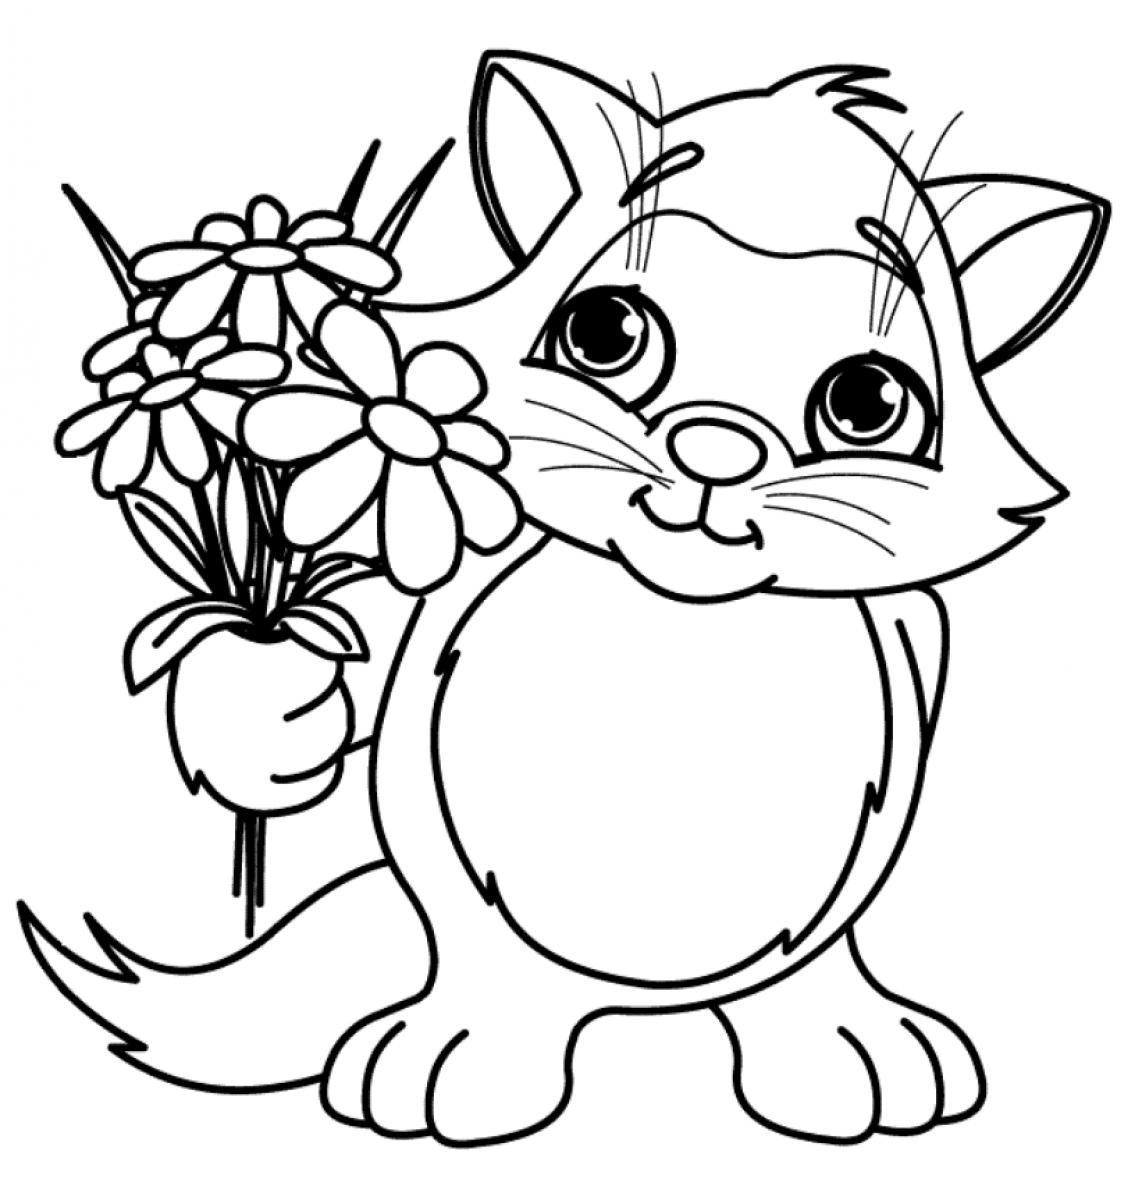 Free Coloring Sheets Spring
 Spring Coloring Pages Free